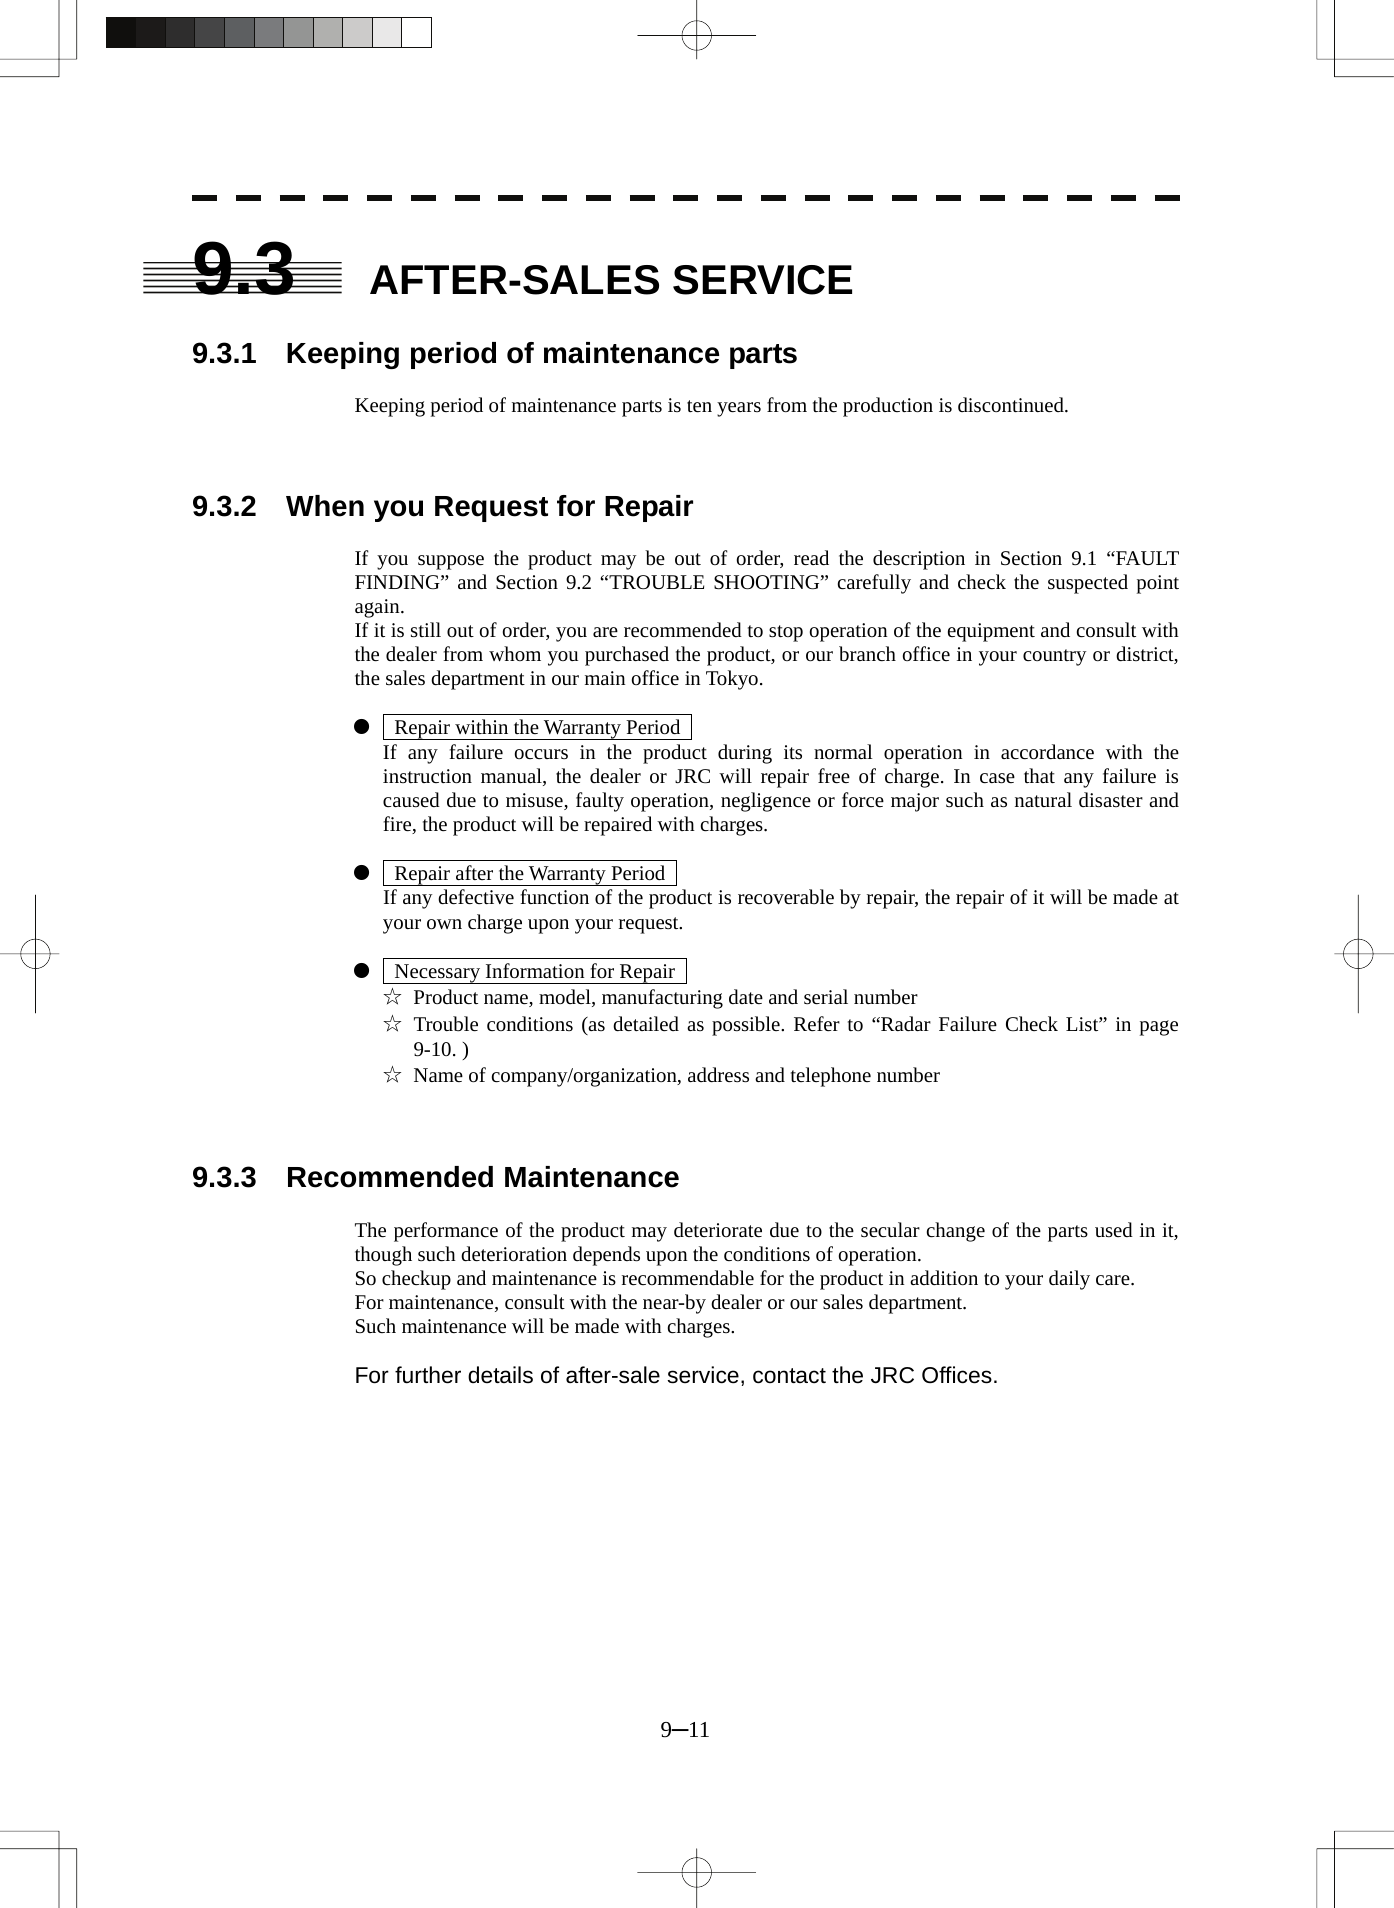  9─11 9.3 AFTER-SALES SERVICE  9.3.1    Keeping period of maintenance parts  Keeping period of maintenance parts is ten years from the production is discontinued.    9.3.2    When you Request for Repair  If you suppose the product may be out of order, read the description in Section 9.1 “FAULT FINDING” and Section 9.2 “TROUBLE SHOOTING” carefully and check the suspected point again. If it is still out of order, you are recommended to stop operation of the equipment and consult with the dealer from whom you purchased the product, or our branch office in your country or district, the sales department in our main office in Tokyo.  z    Repair within the Warranty Period     If any failure occurs in the product during its normal operation in accordance with the instruction manual, the dealer or JRC will repair free of charge. In case that any failure is caused due to misuse, faulty operation, negligence or force major such as natural disaster and fire, the product will be repaired with charges.  z    Repair after the Warranty Period     If any defective function of the product is recoverable by repair, the repair of it will be made at your own charge upon your request.  z    Necessary Information for Repair   ☆  Product name, model, manufacturing date and serial number ☆ Trouble conditions (as detailed as possible. Refer to “Radar Failure Check List” in page 9-10. ) ☆  Name of company/organization, address and telephone number    9.3.3  Recommended Maintenance  The performance of the product may deteriorate due to the secular change of the parts used in it, though such deterioration depends upon the conditions of operation. So checkup and maintenance is recommendable for the product in addition to your daily care. For maintenance, consult with the near-by dealer or our sales department. Such maintenance will be made with charges.  For further details of after-sale service, contact the JRC Offices. 